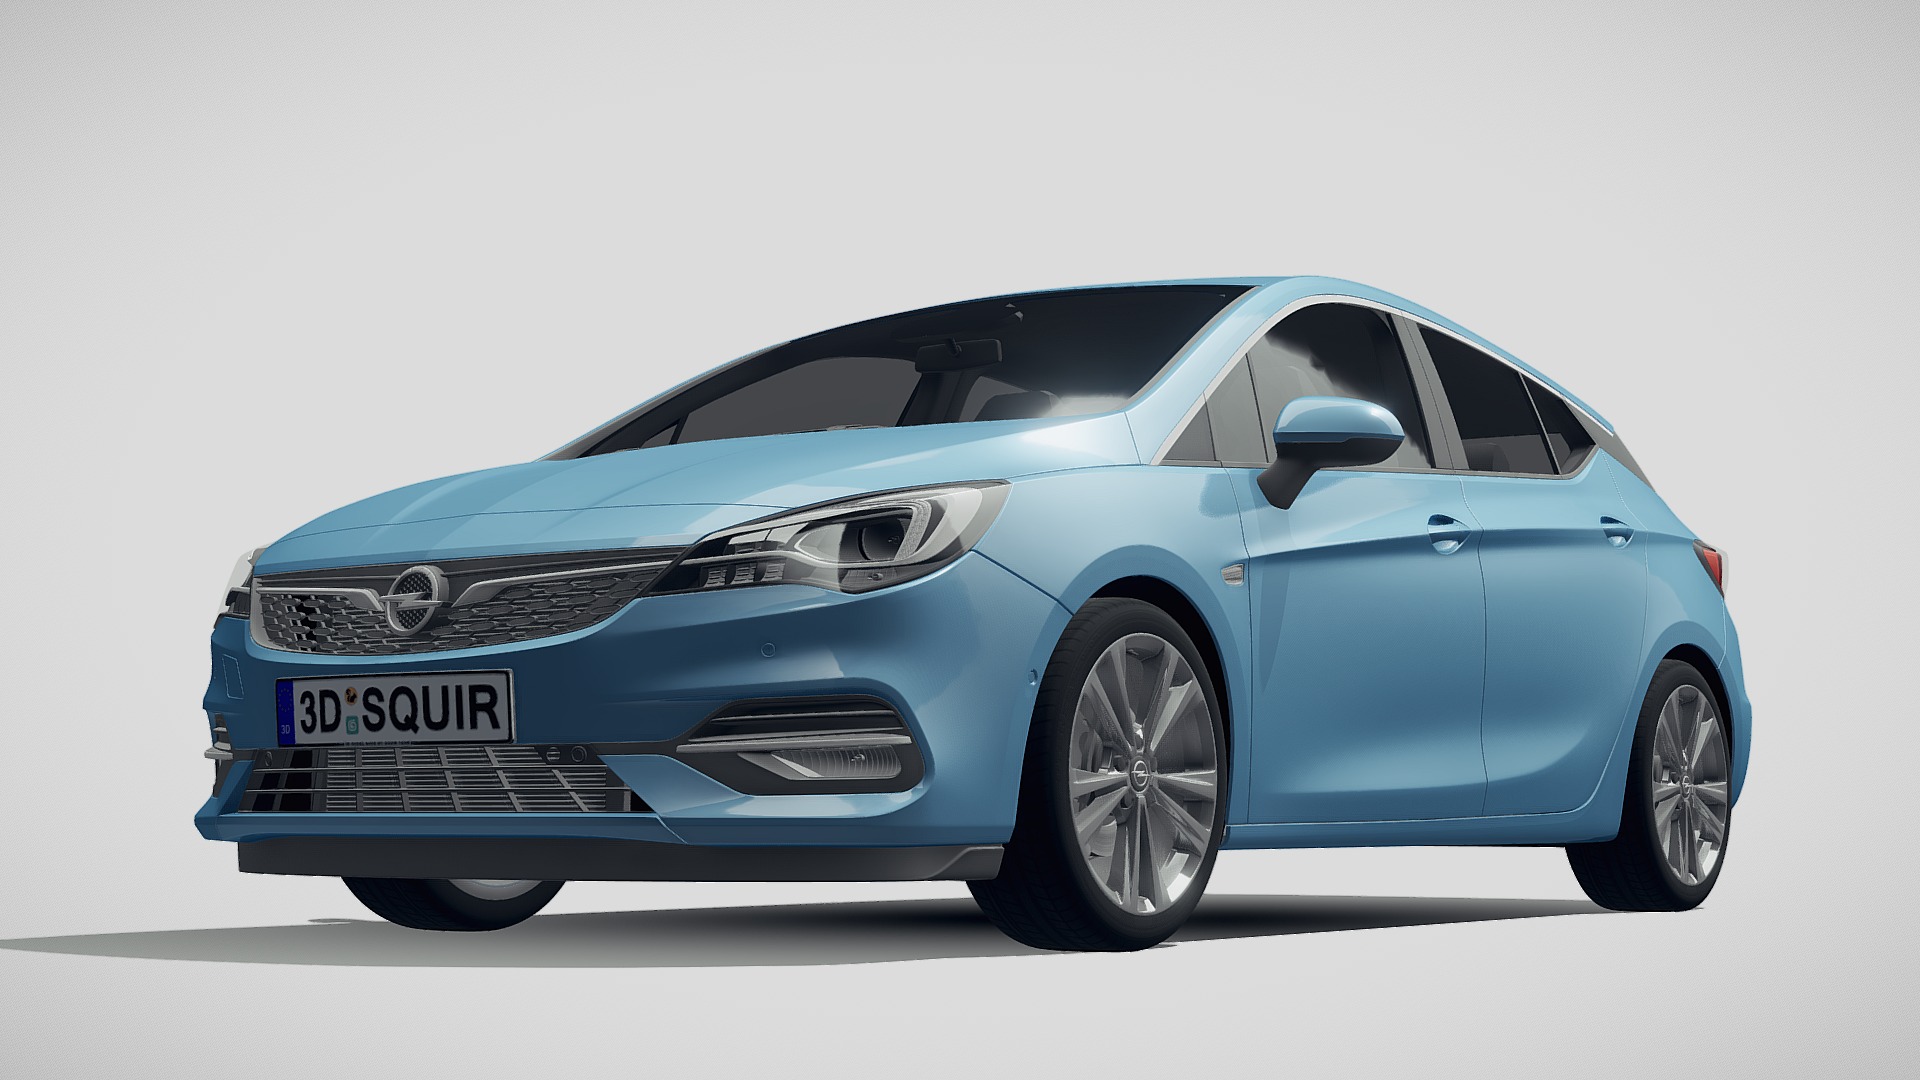 3D model Opel Astra 2020 - This is a 3D model of the Opel Astra 2020. The 3D model is about a blue car with a white background.